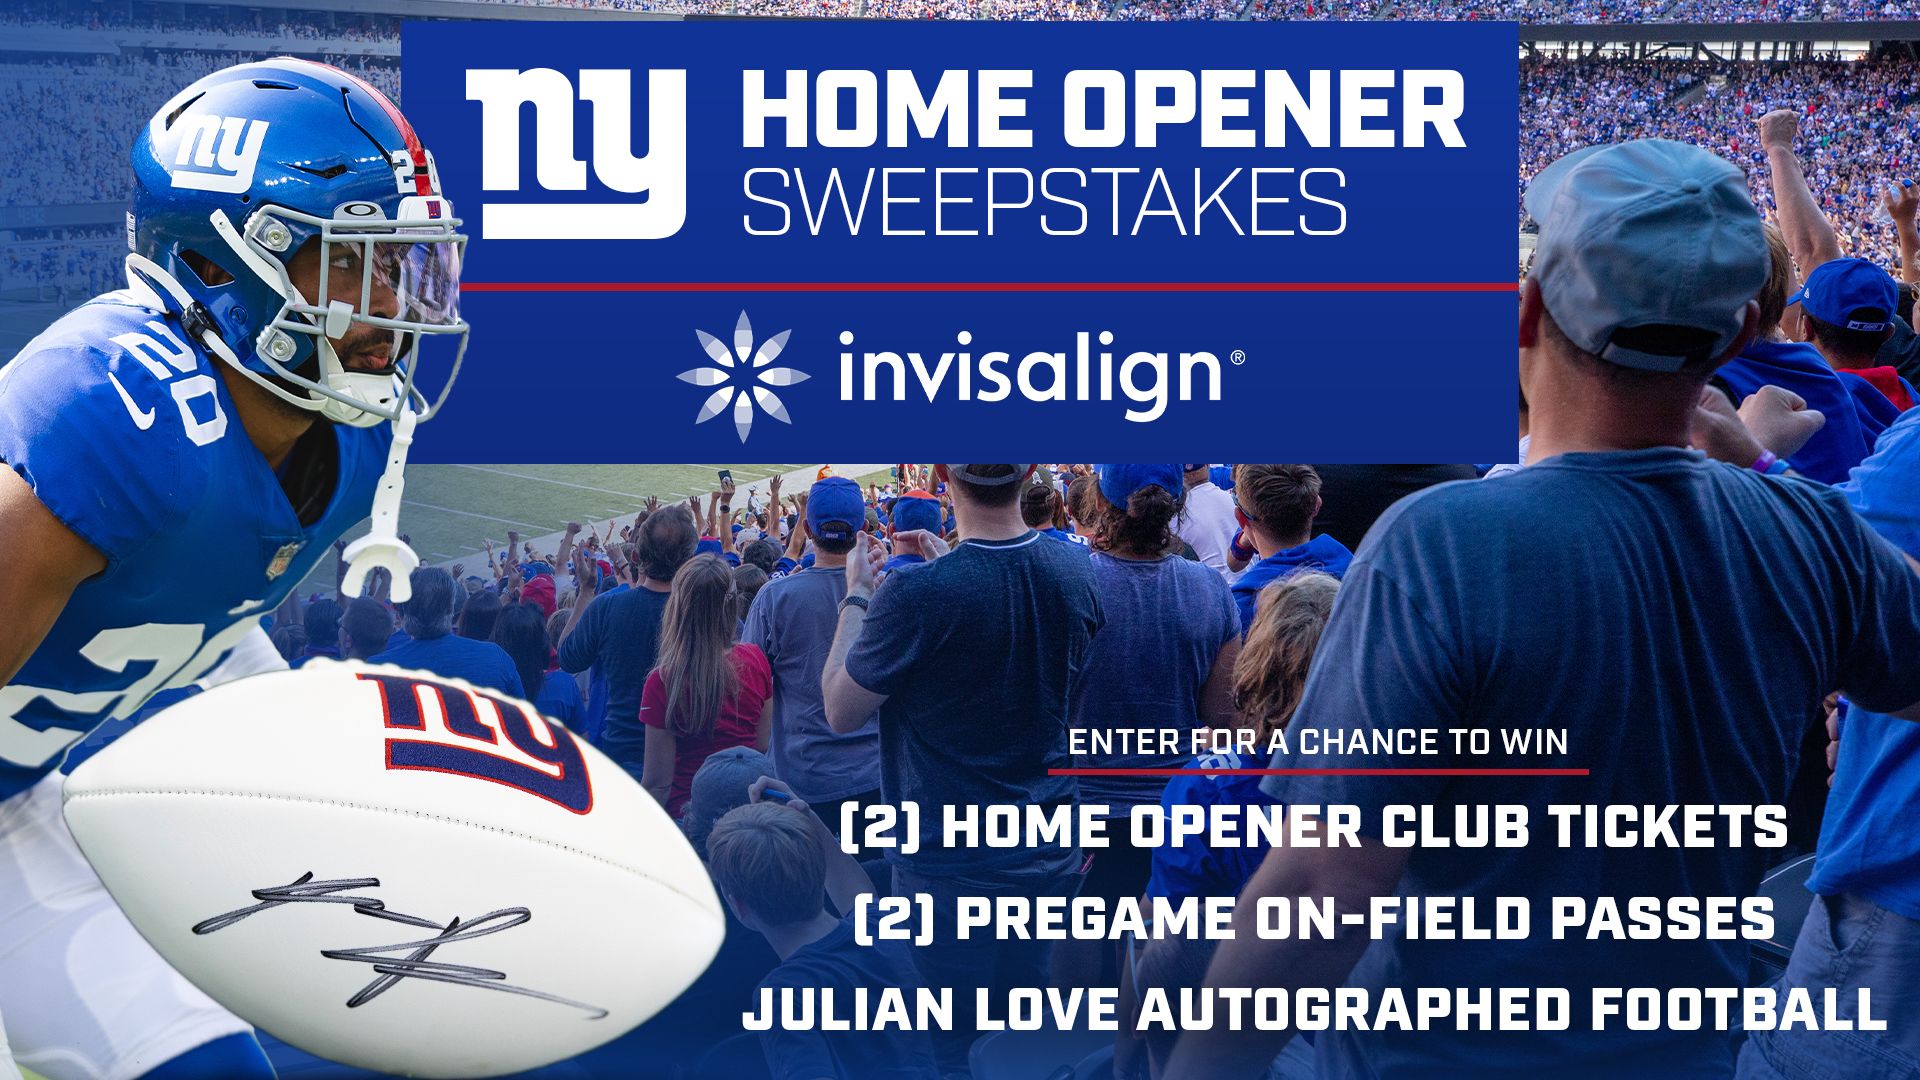 Giants Home Opener Sweepstakes  Win two club tickets, plus two pregame  game field passes and a Julian Love autographed football